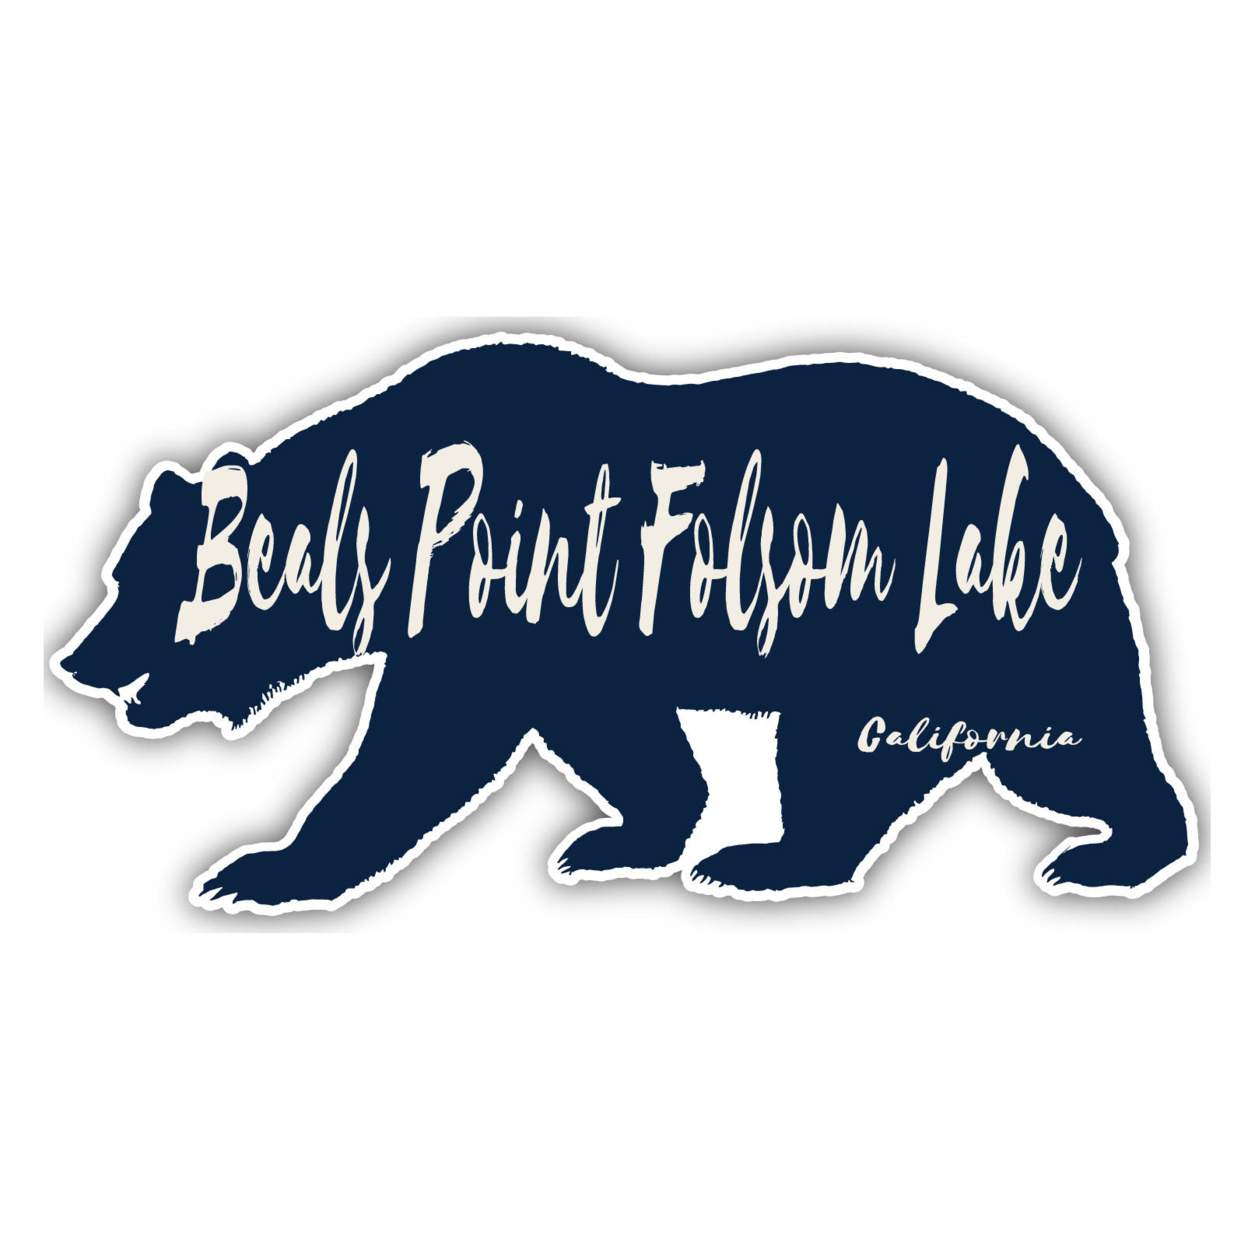 Beals Point Folsom Lake California Souvenir Decorative Stickers (Choose Theme And Size) - 4-Pack, 12-Inch, Tent